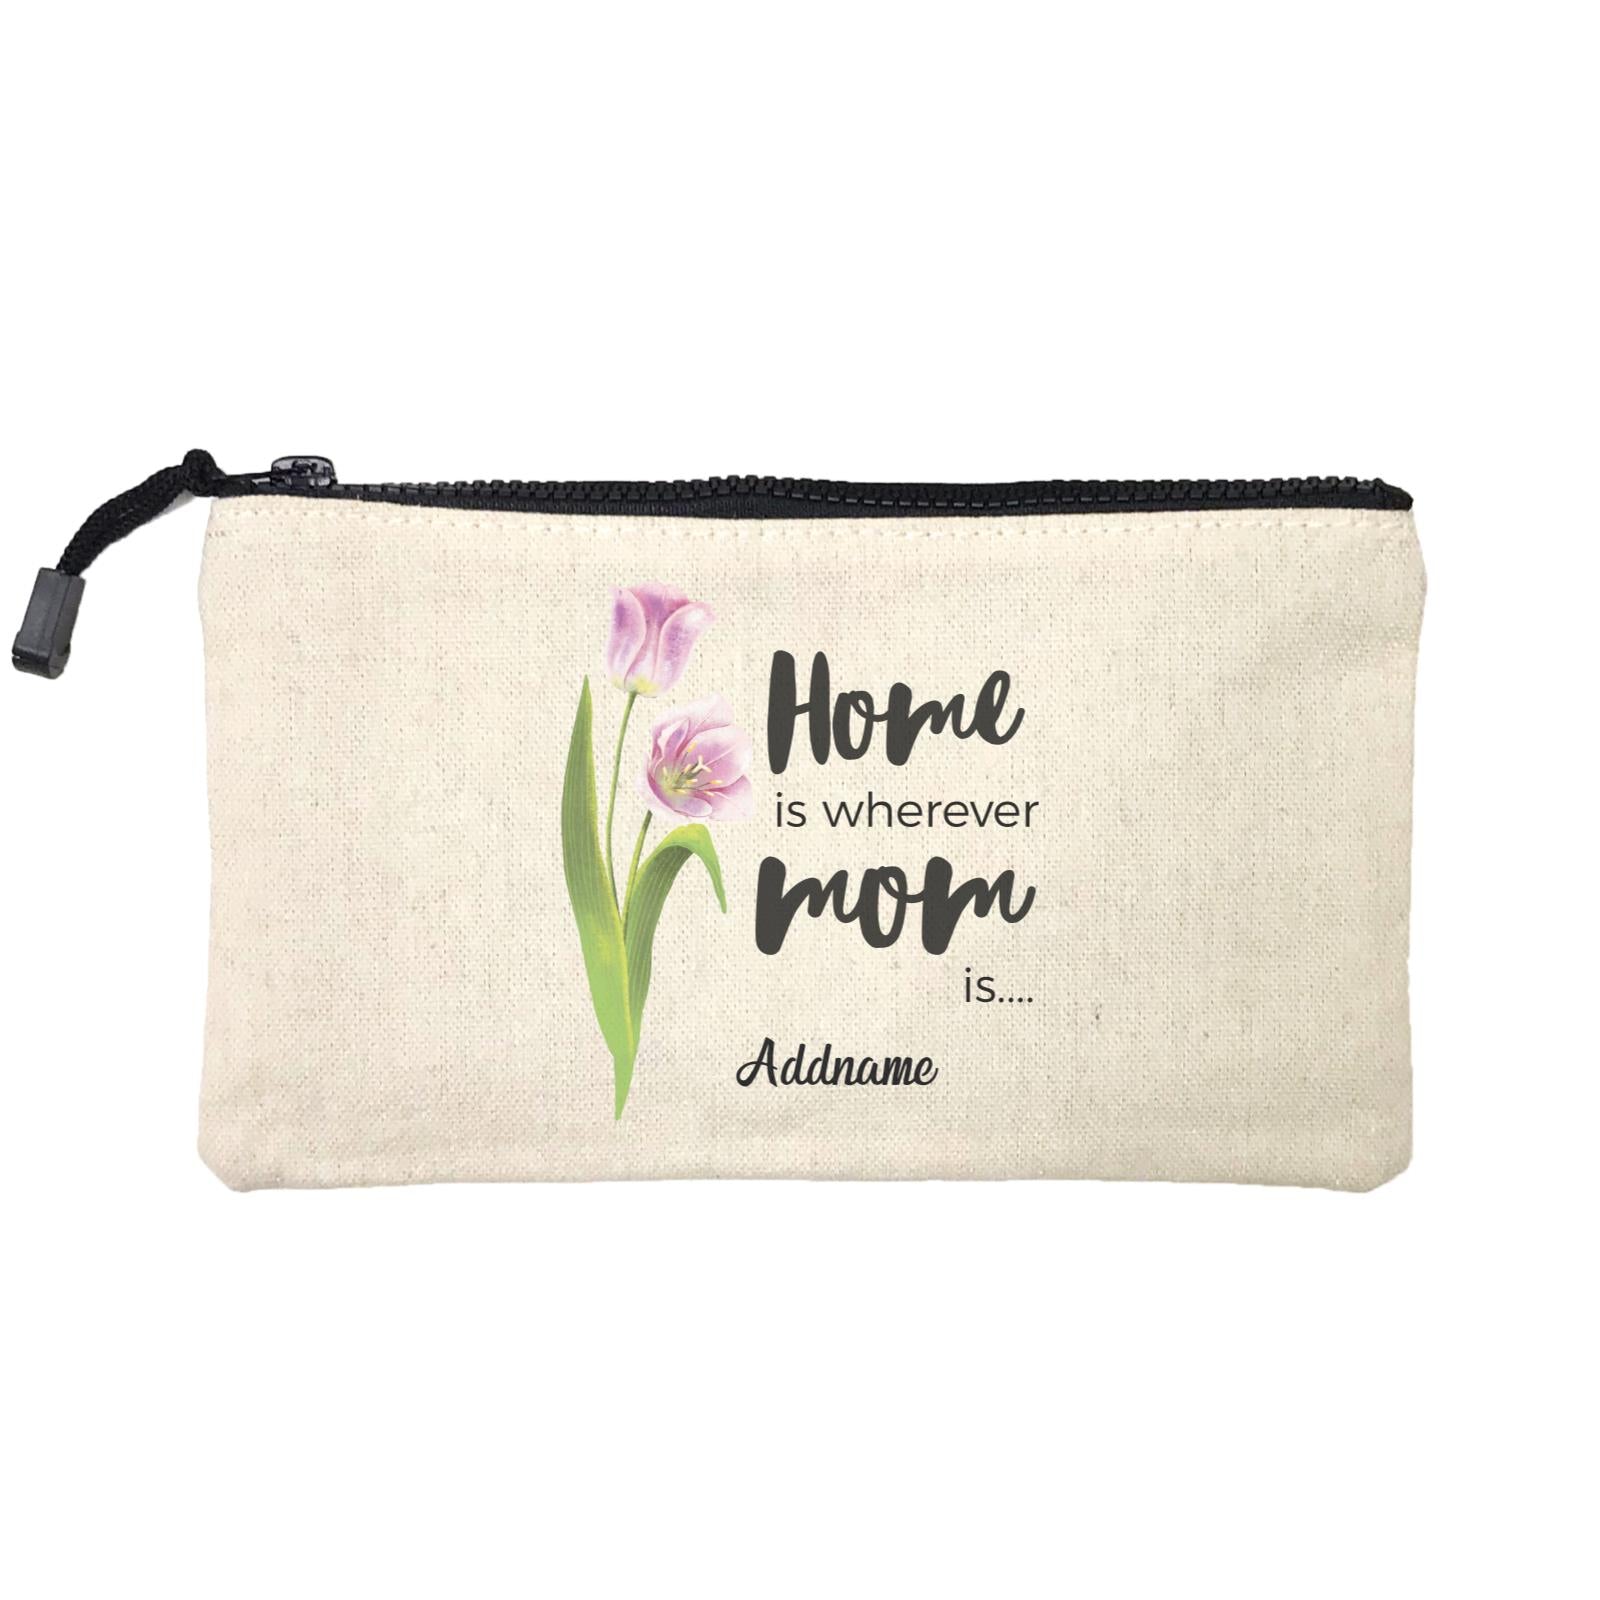 Sweet Mom Quotes 1 Tulip Home Is Wherever Mom Is Addname Mini Accessories Stationery Pouch